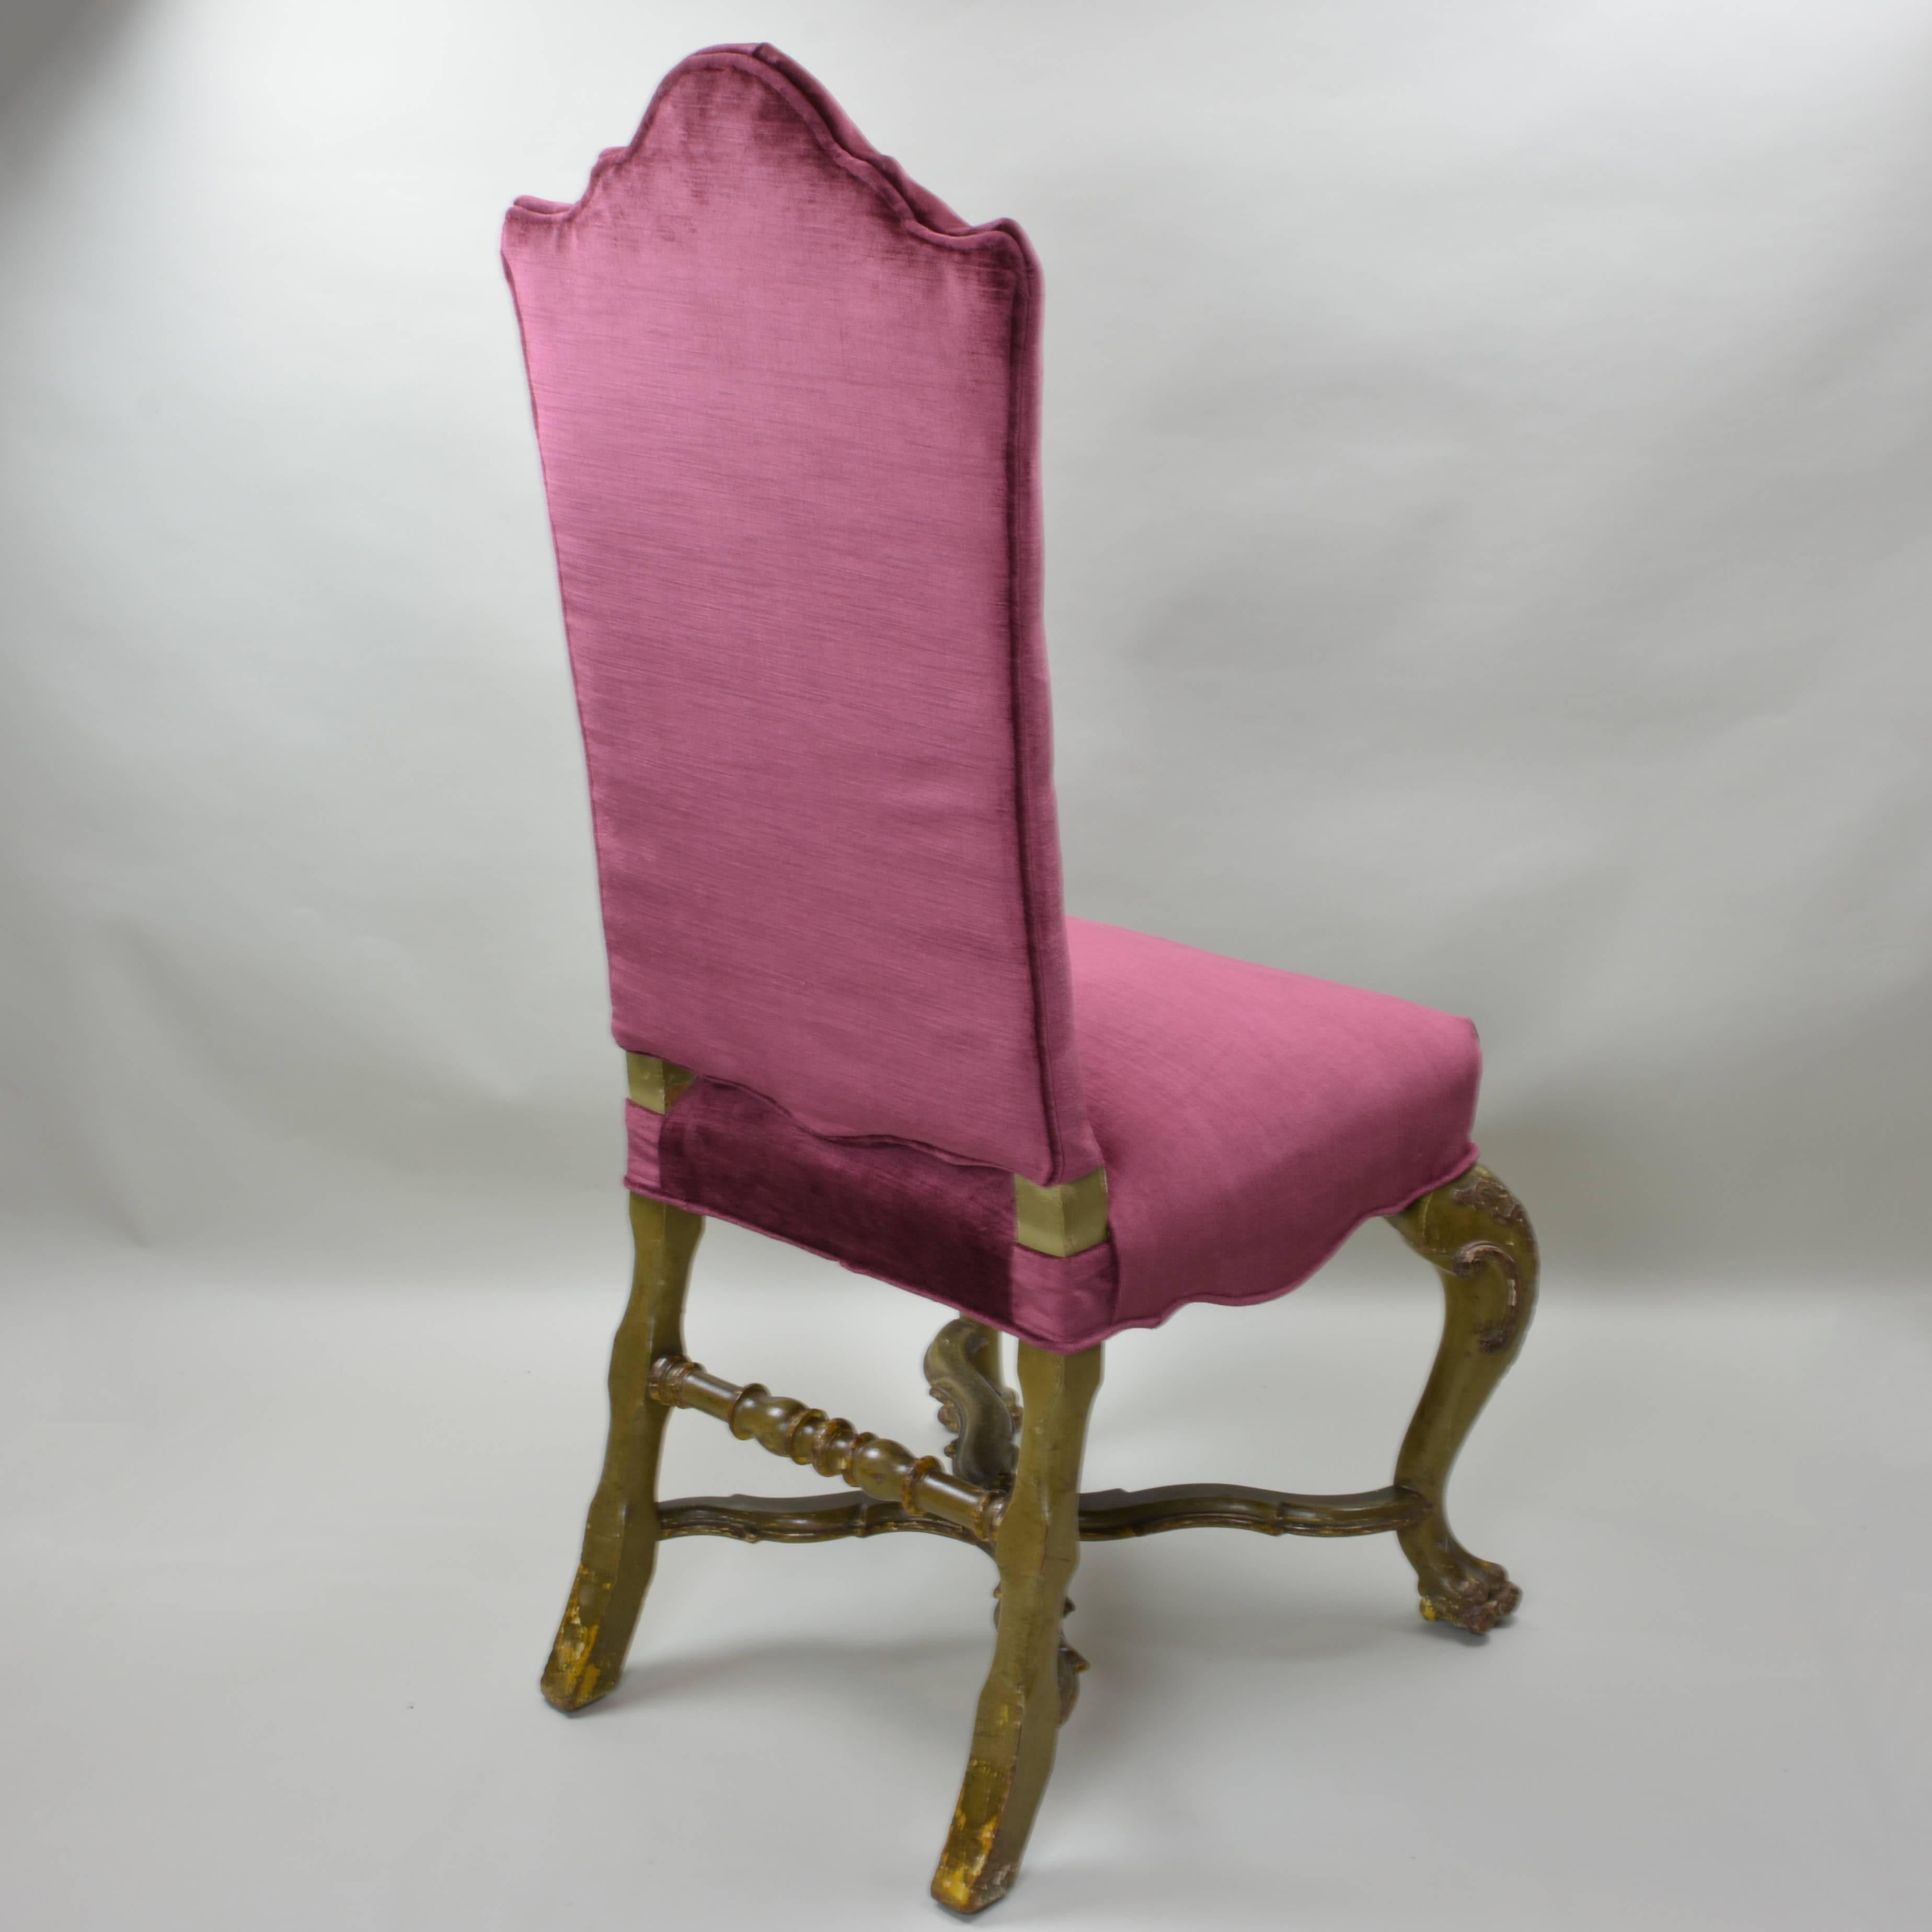 Rococo 18th Century Venetian High Back Chairs For Sale